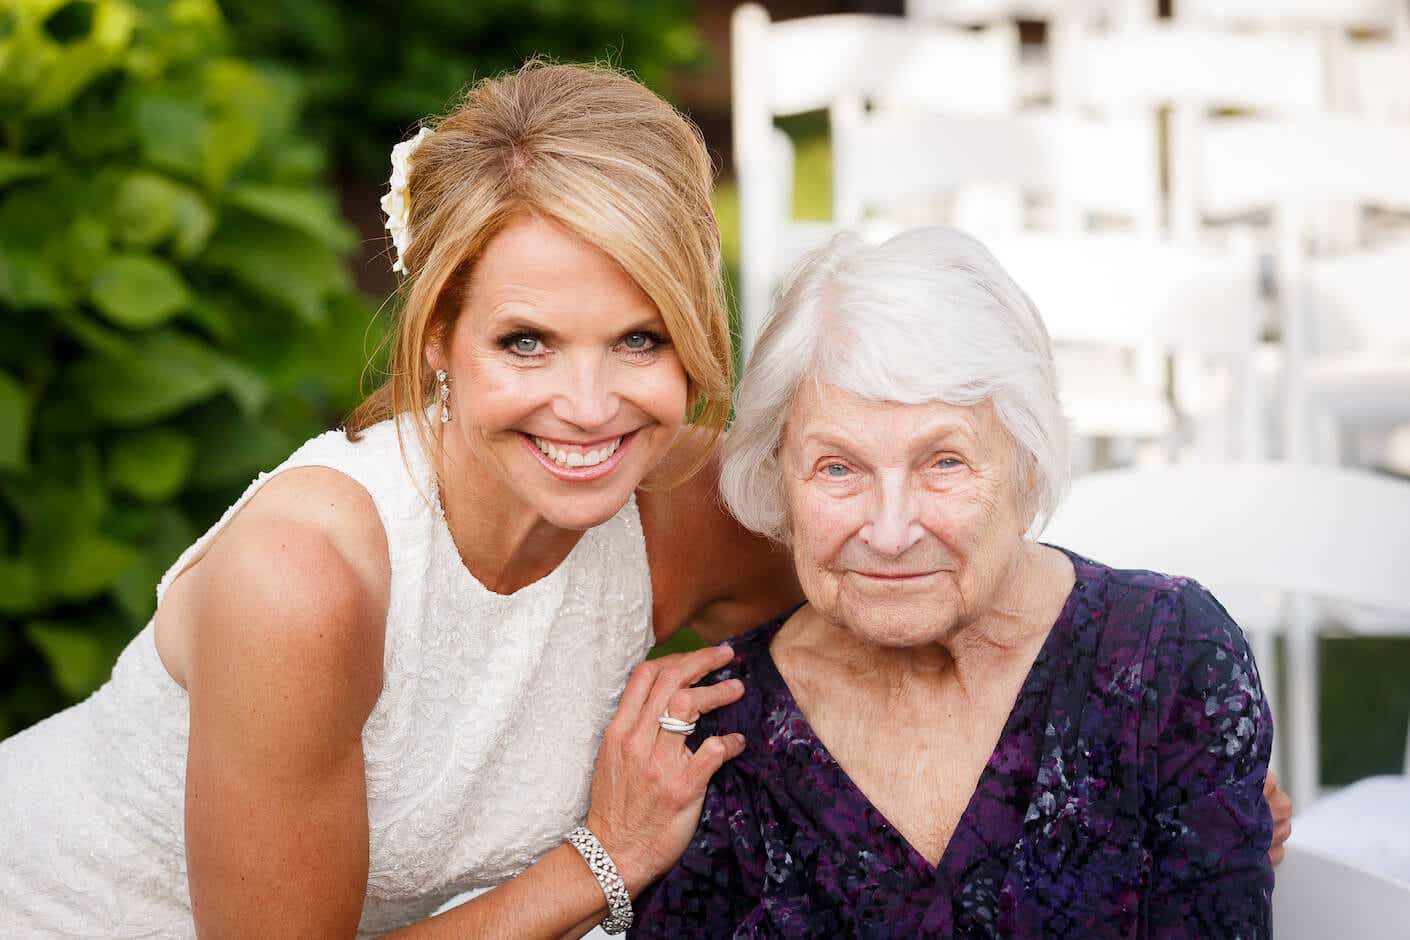 katie couric and her mom at her wedding